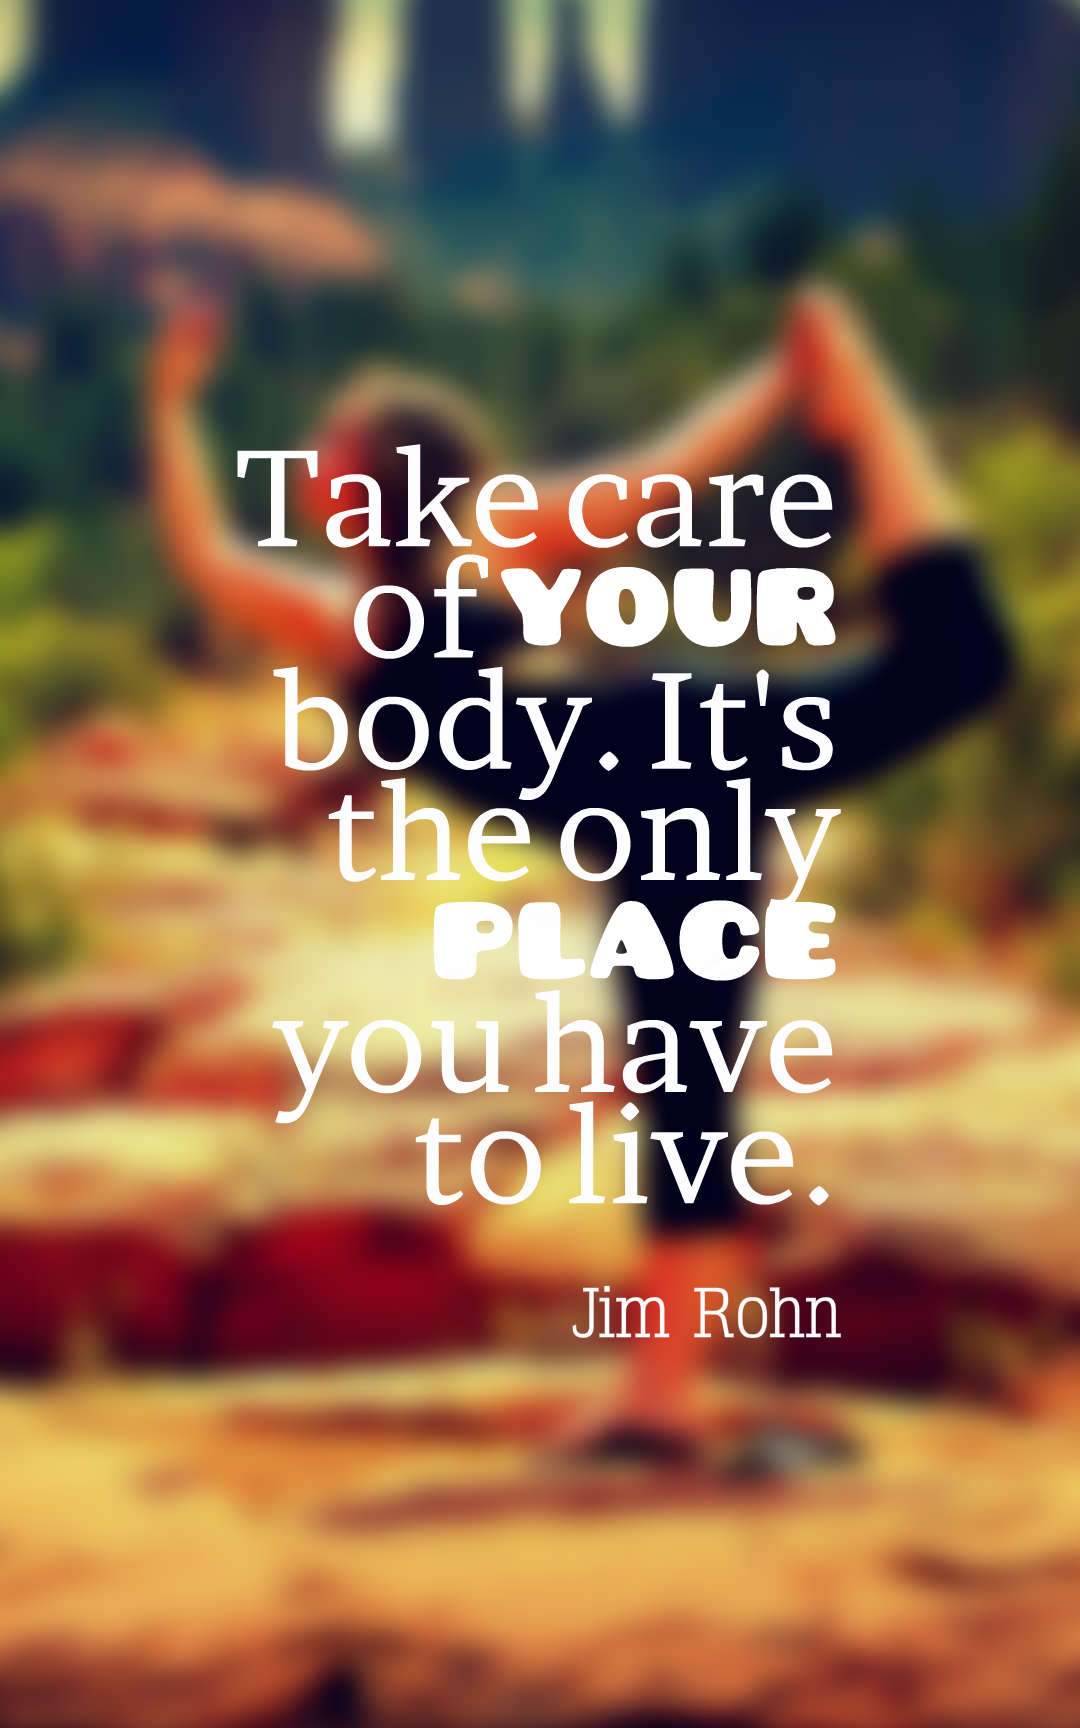 Take care of your body. It's the only place you have to live.